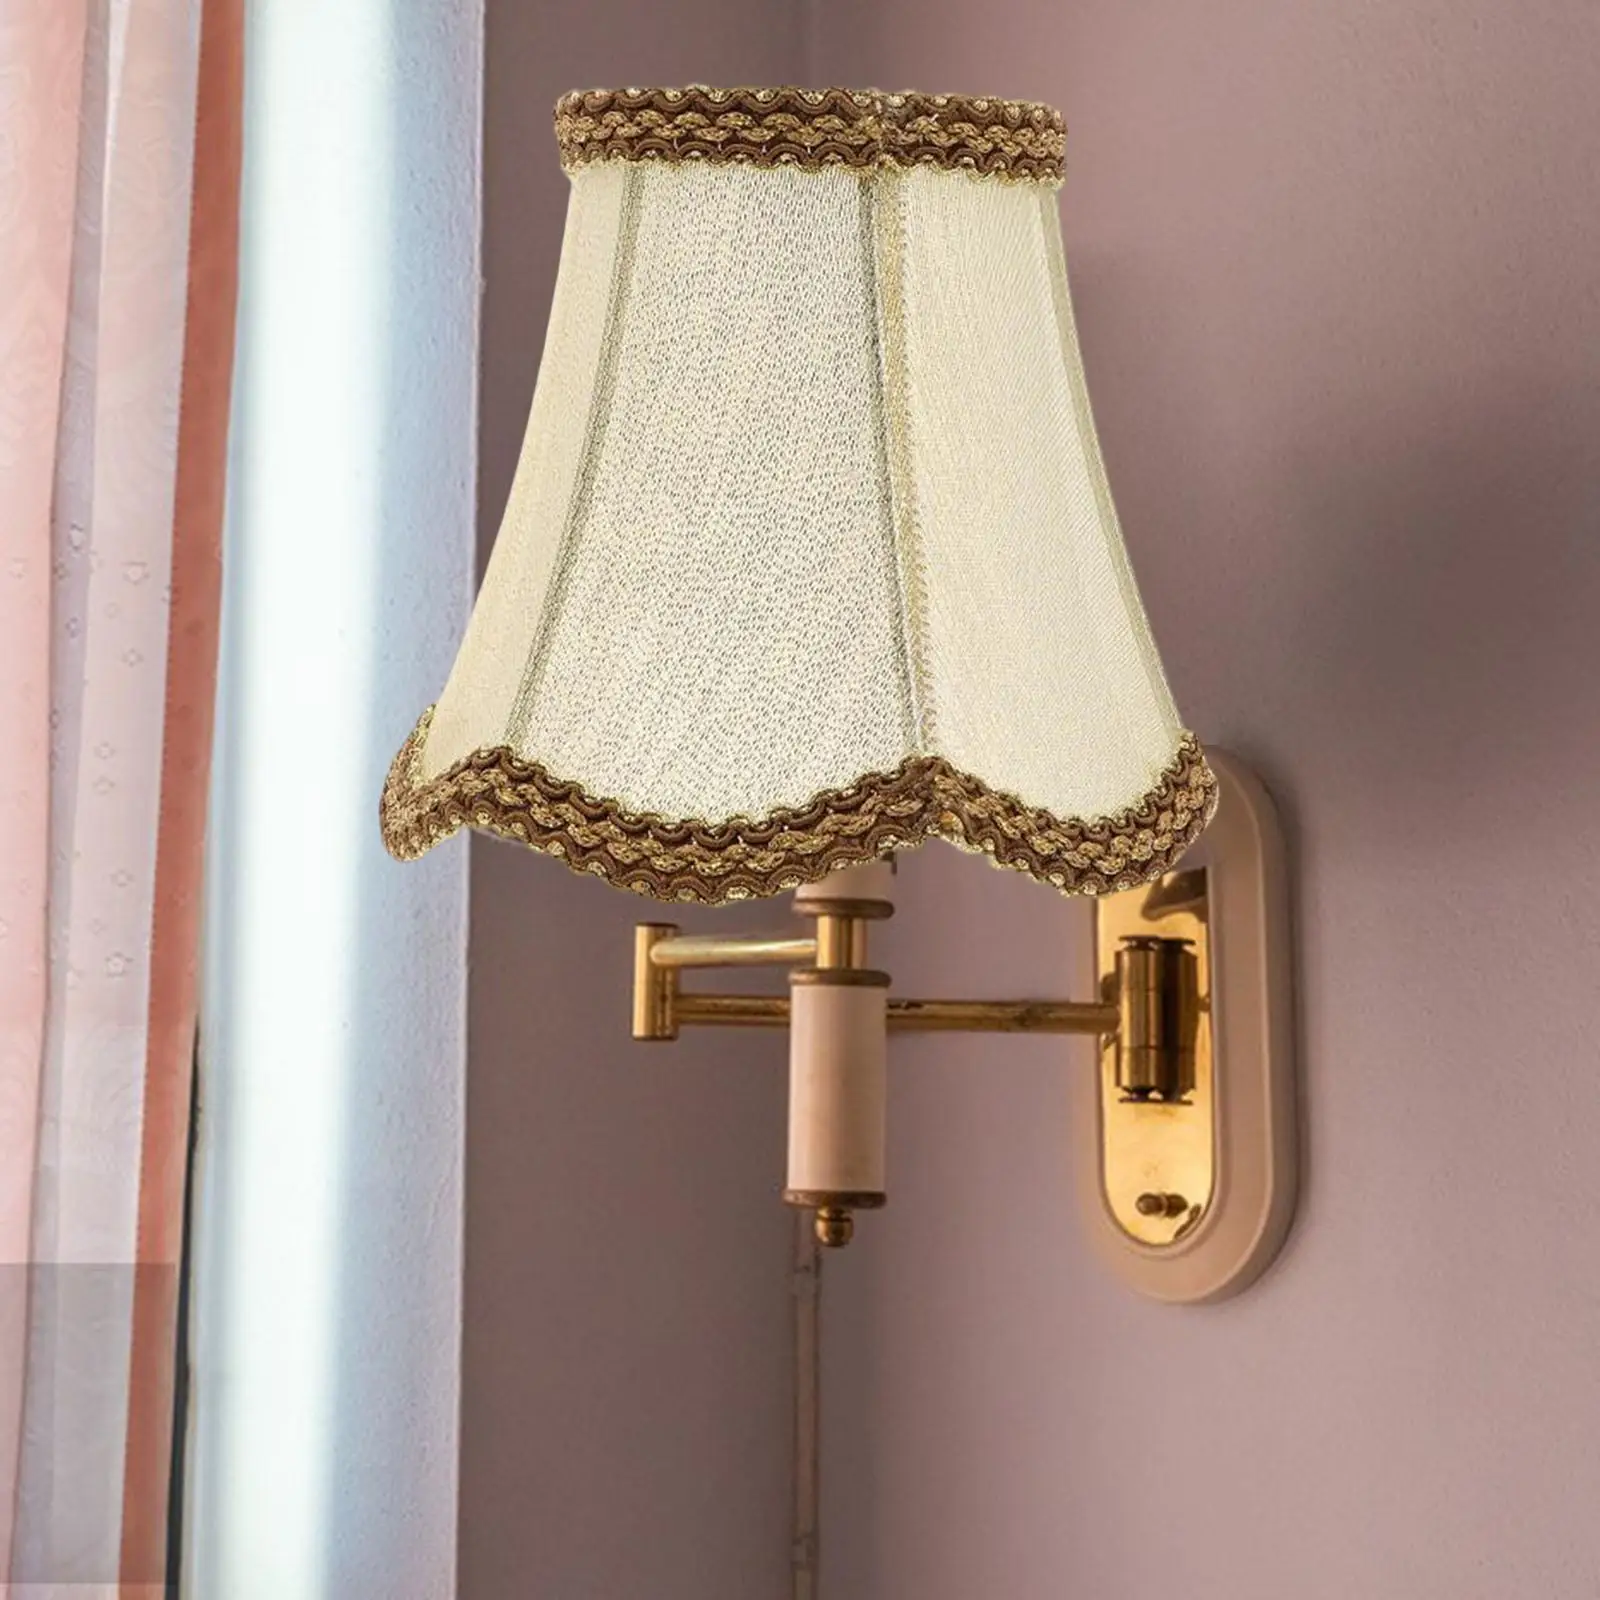 Retro Style Lampshade Ceiling Light Cover Lamp Shade for Dining Room Kitchen